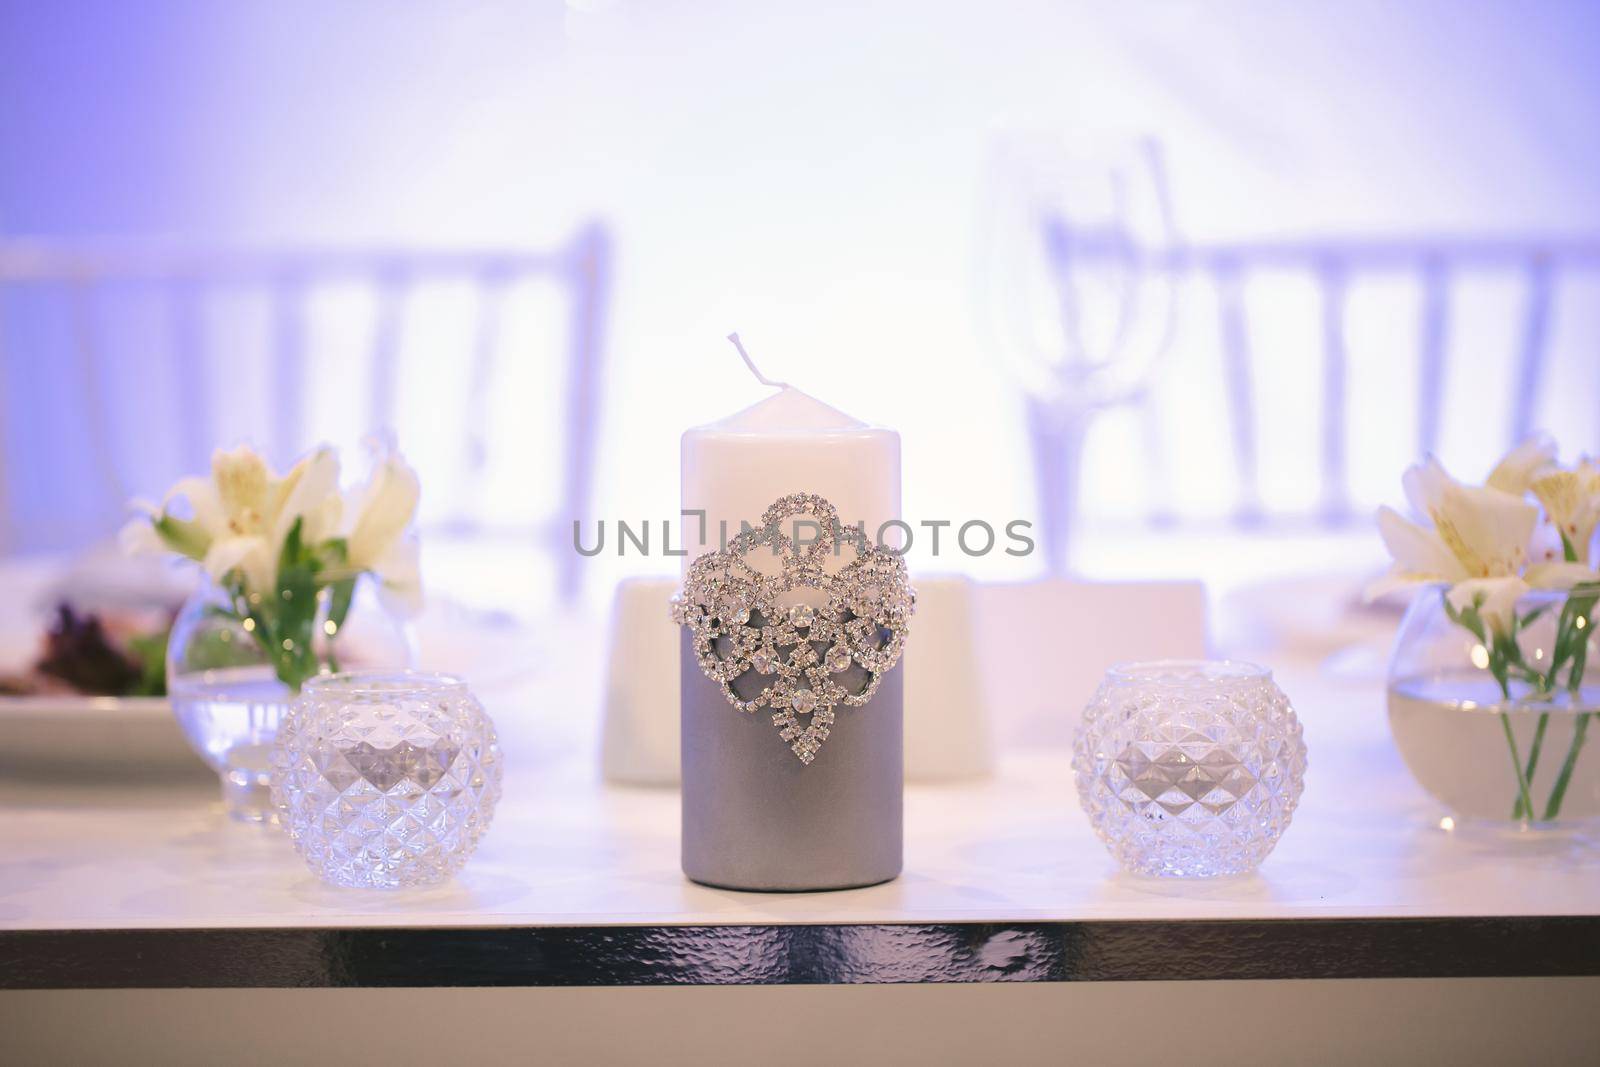 Wedding decor in silver style with crystals, lace and flowers. Wedding candles for the family hearth